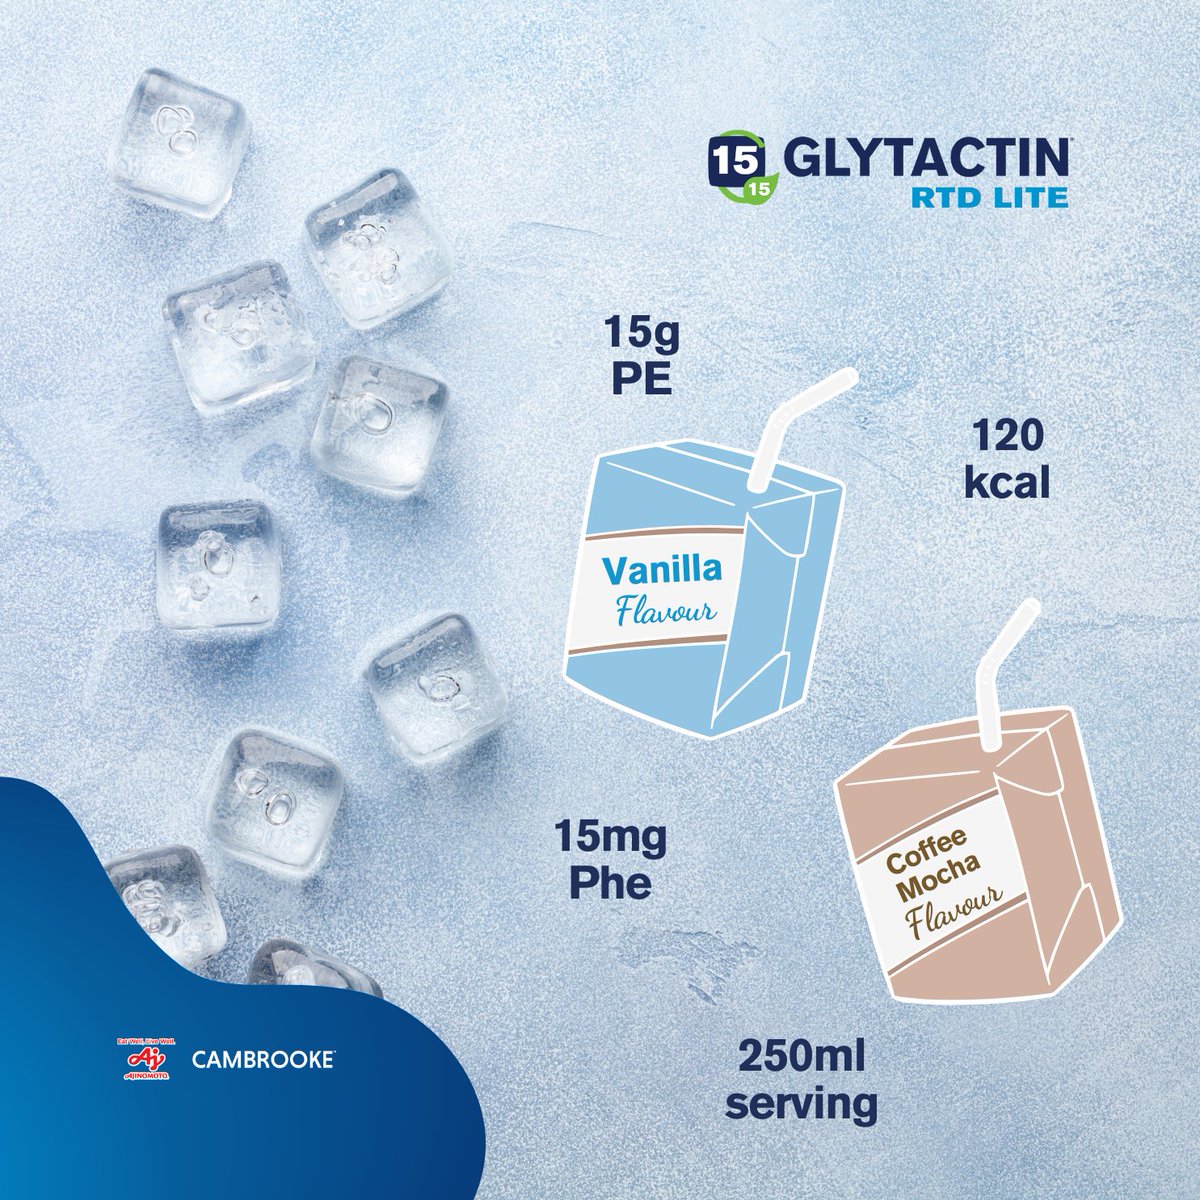 Glytactin RTD LITE 15 in Coffee Mocha & Vanilla flavour.

🧊Perfect ice cold out of the fridge or poured over ice🧊

How do you take yours?

Visit cambrooke.uk to find out more...

#PKU #Phenylketonuria #lowprotein